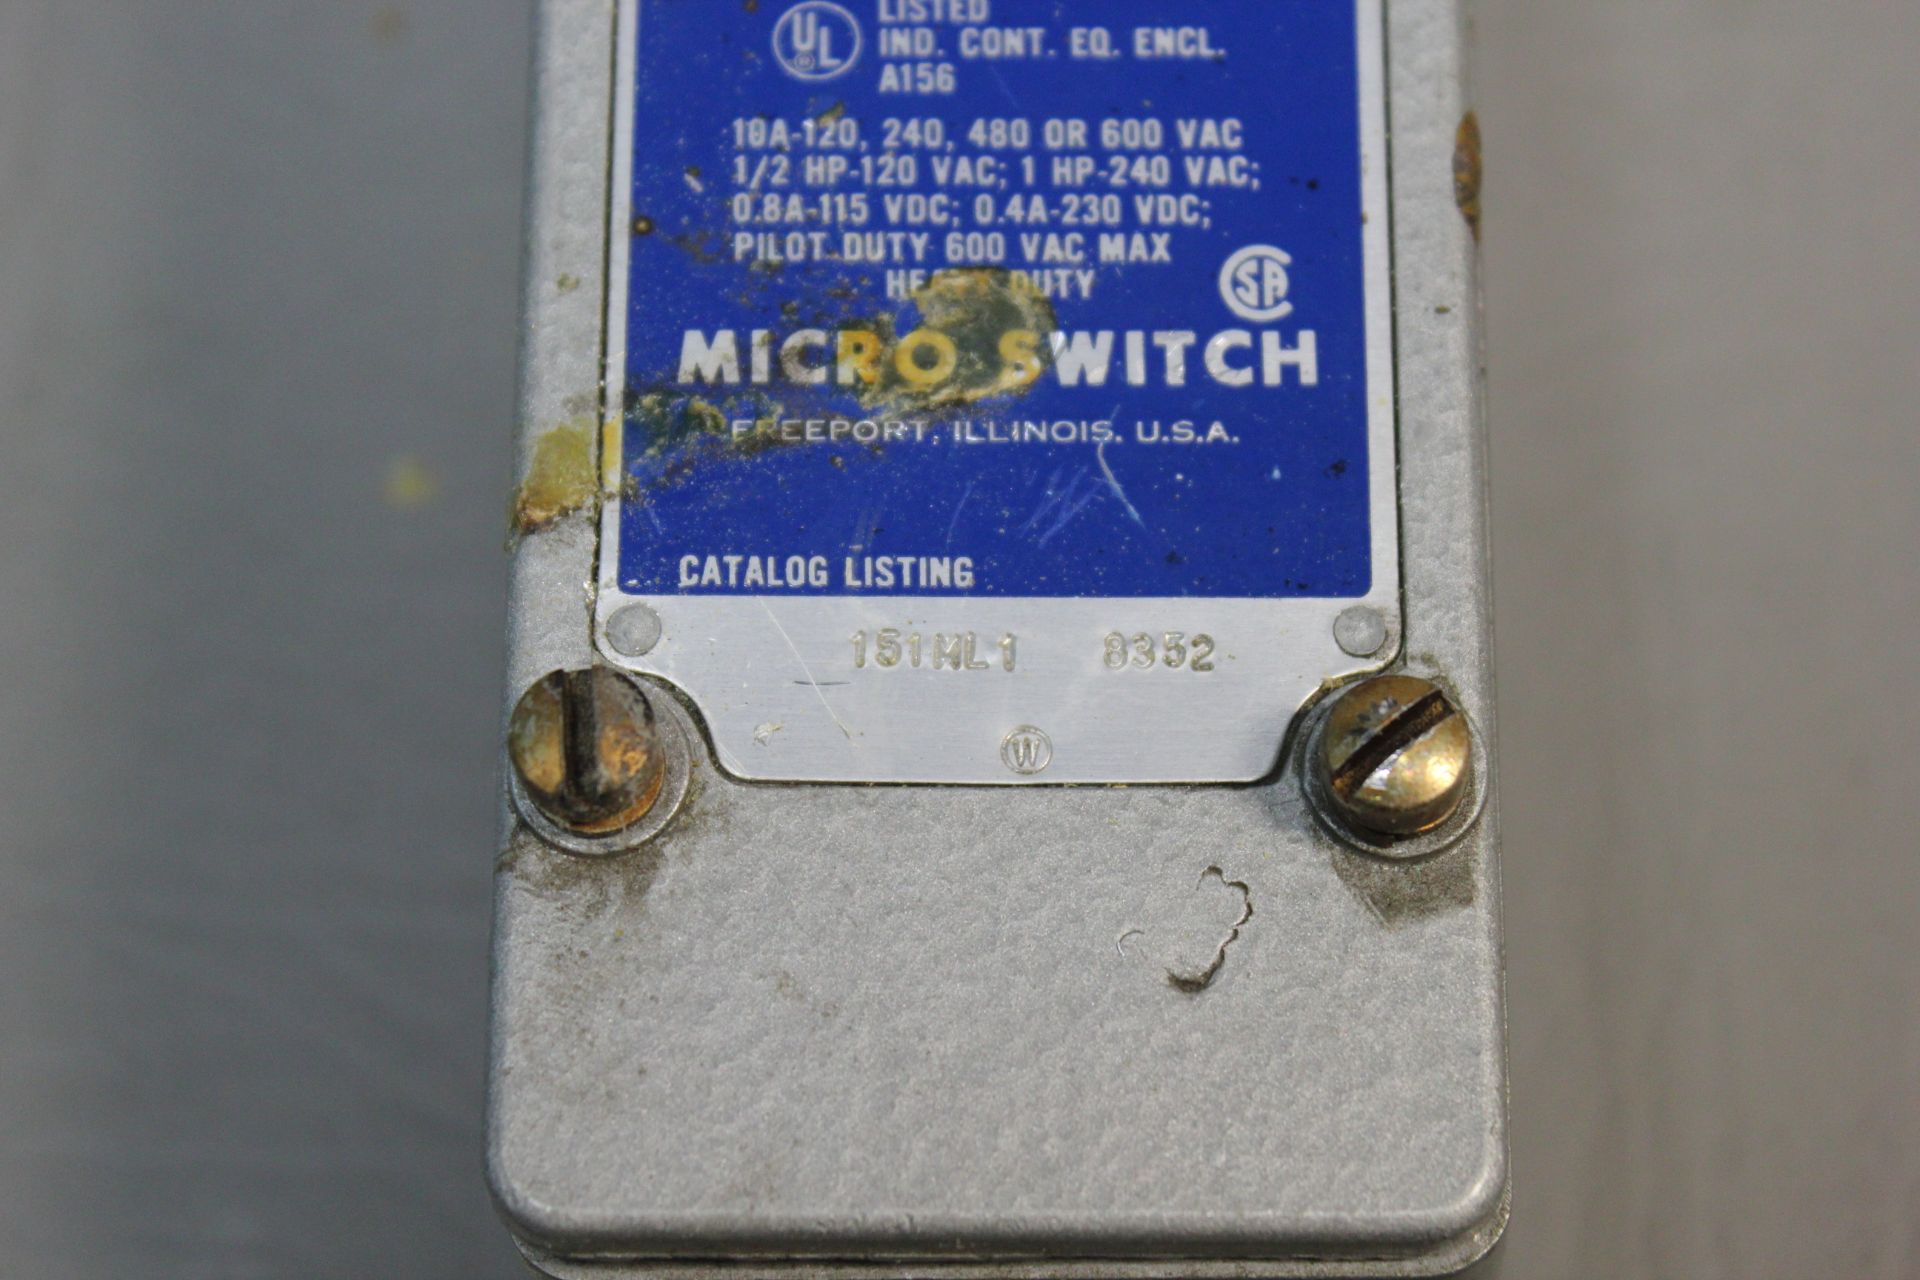 MICROSWITCH PRECISION LIMIT SWITCH - Image 3 of 3